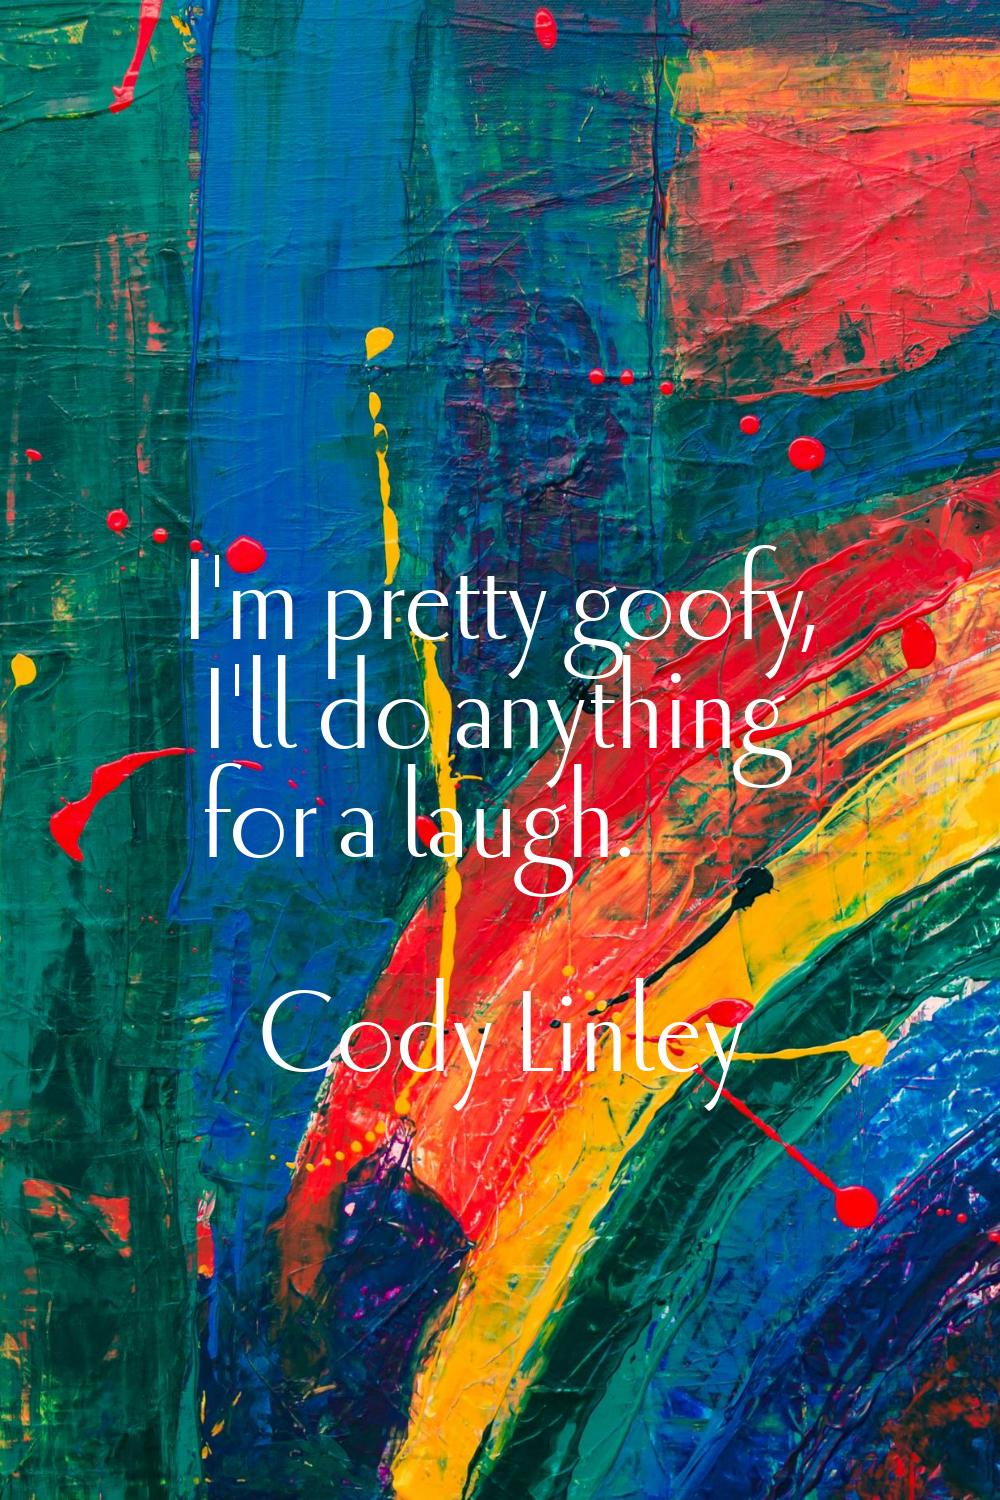 I'm pretty goofy, I'll do anything for a laugh.